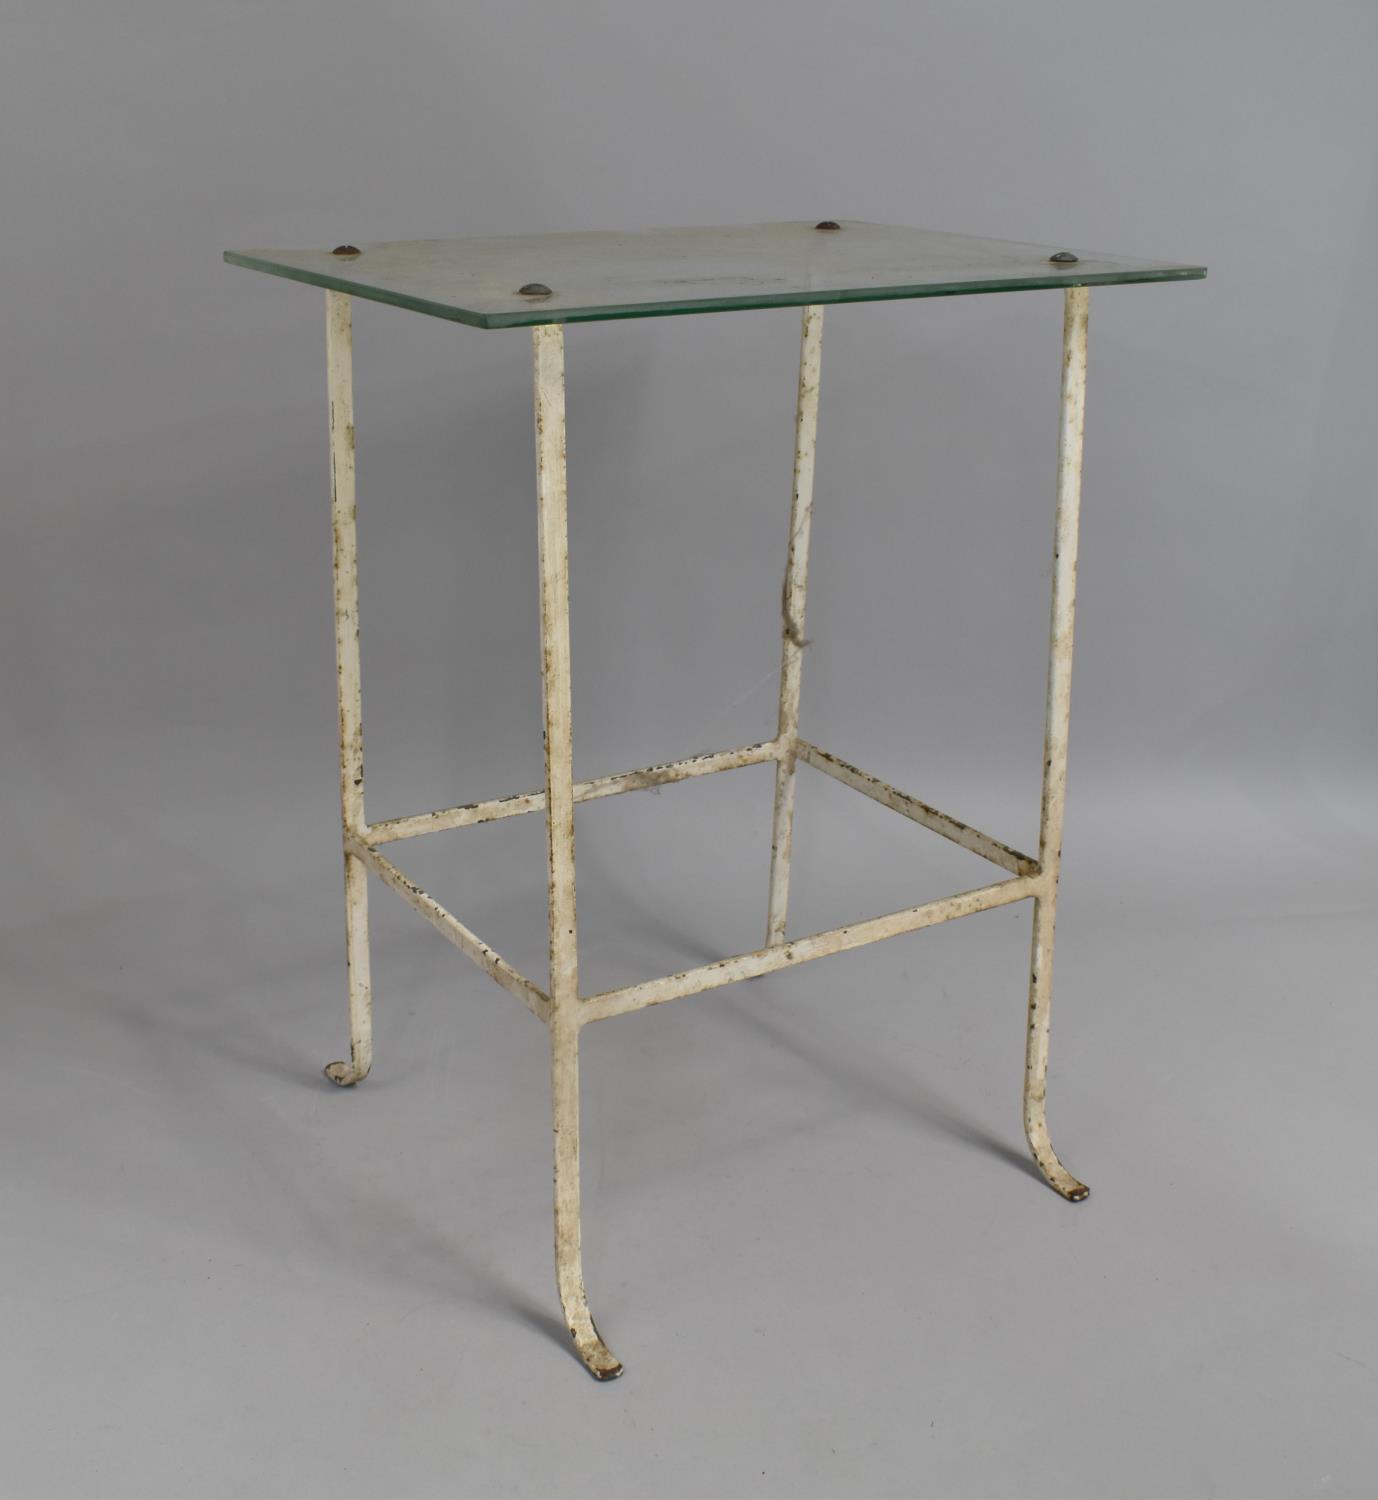 A Glass Top Iron Based Table, 51cm high